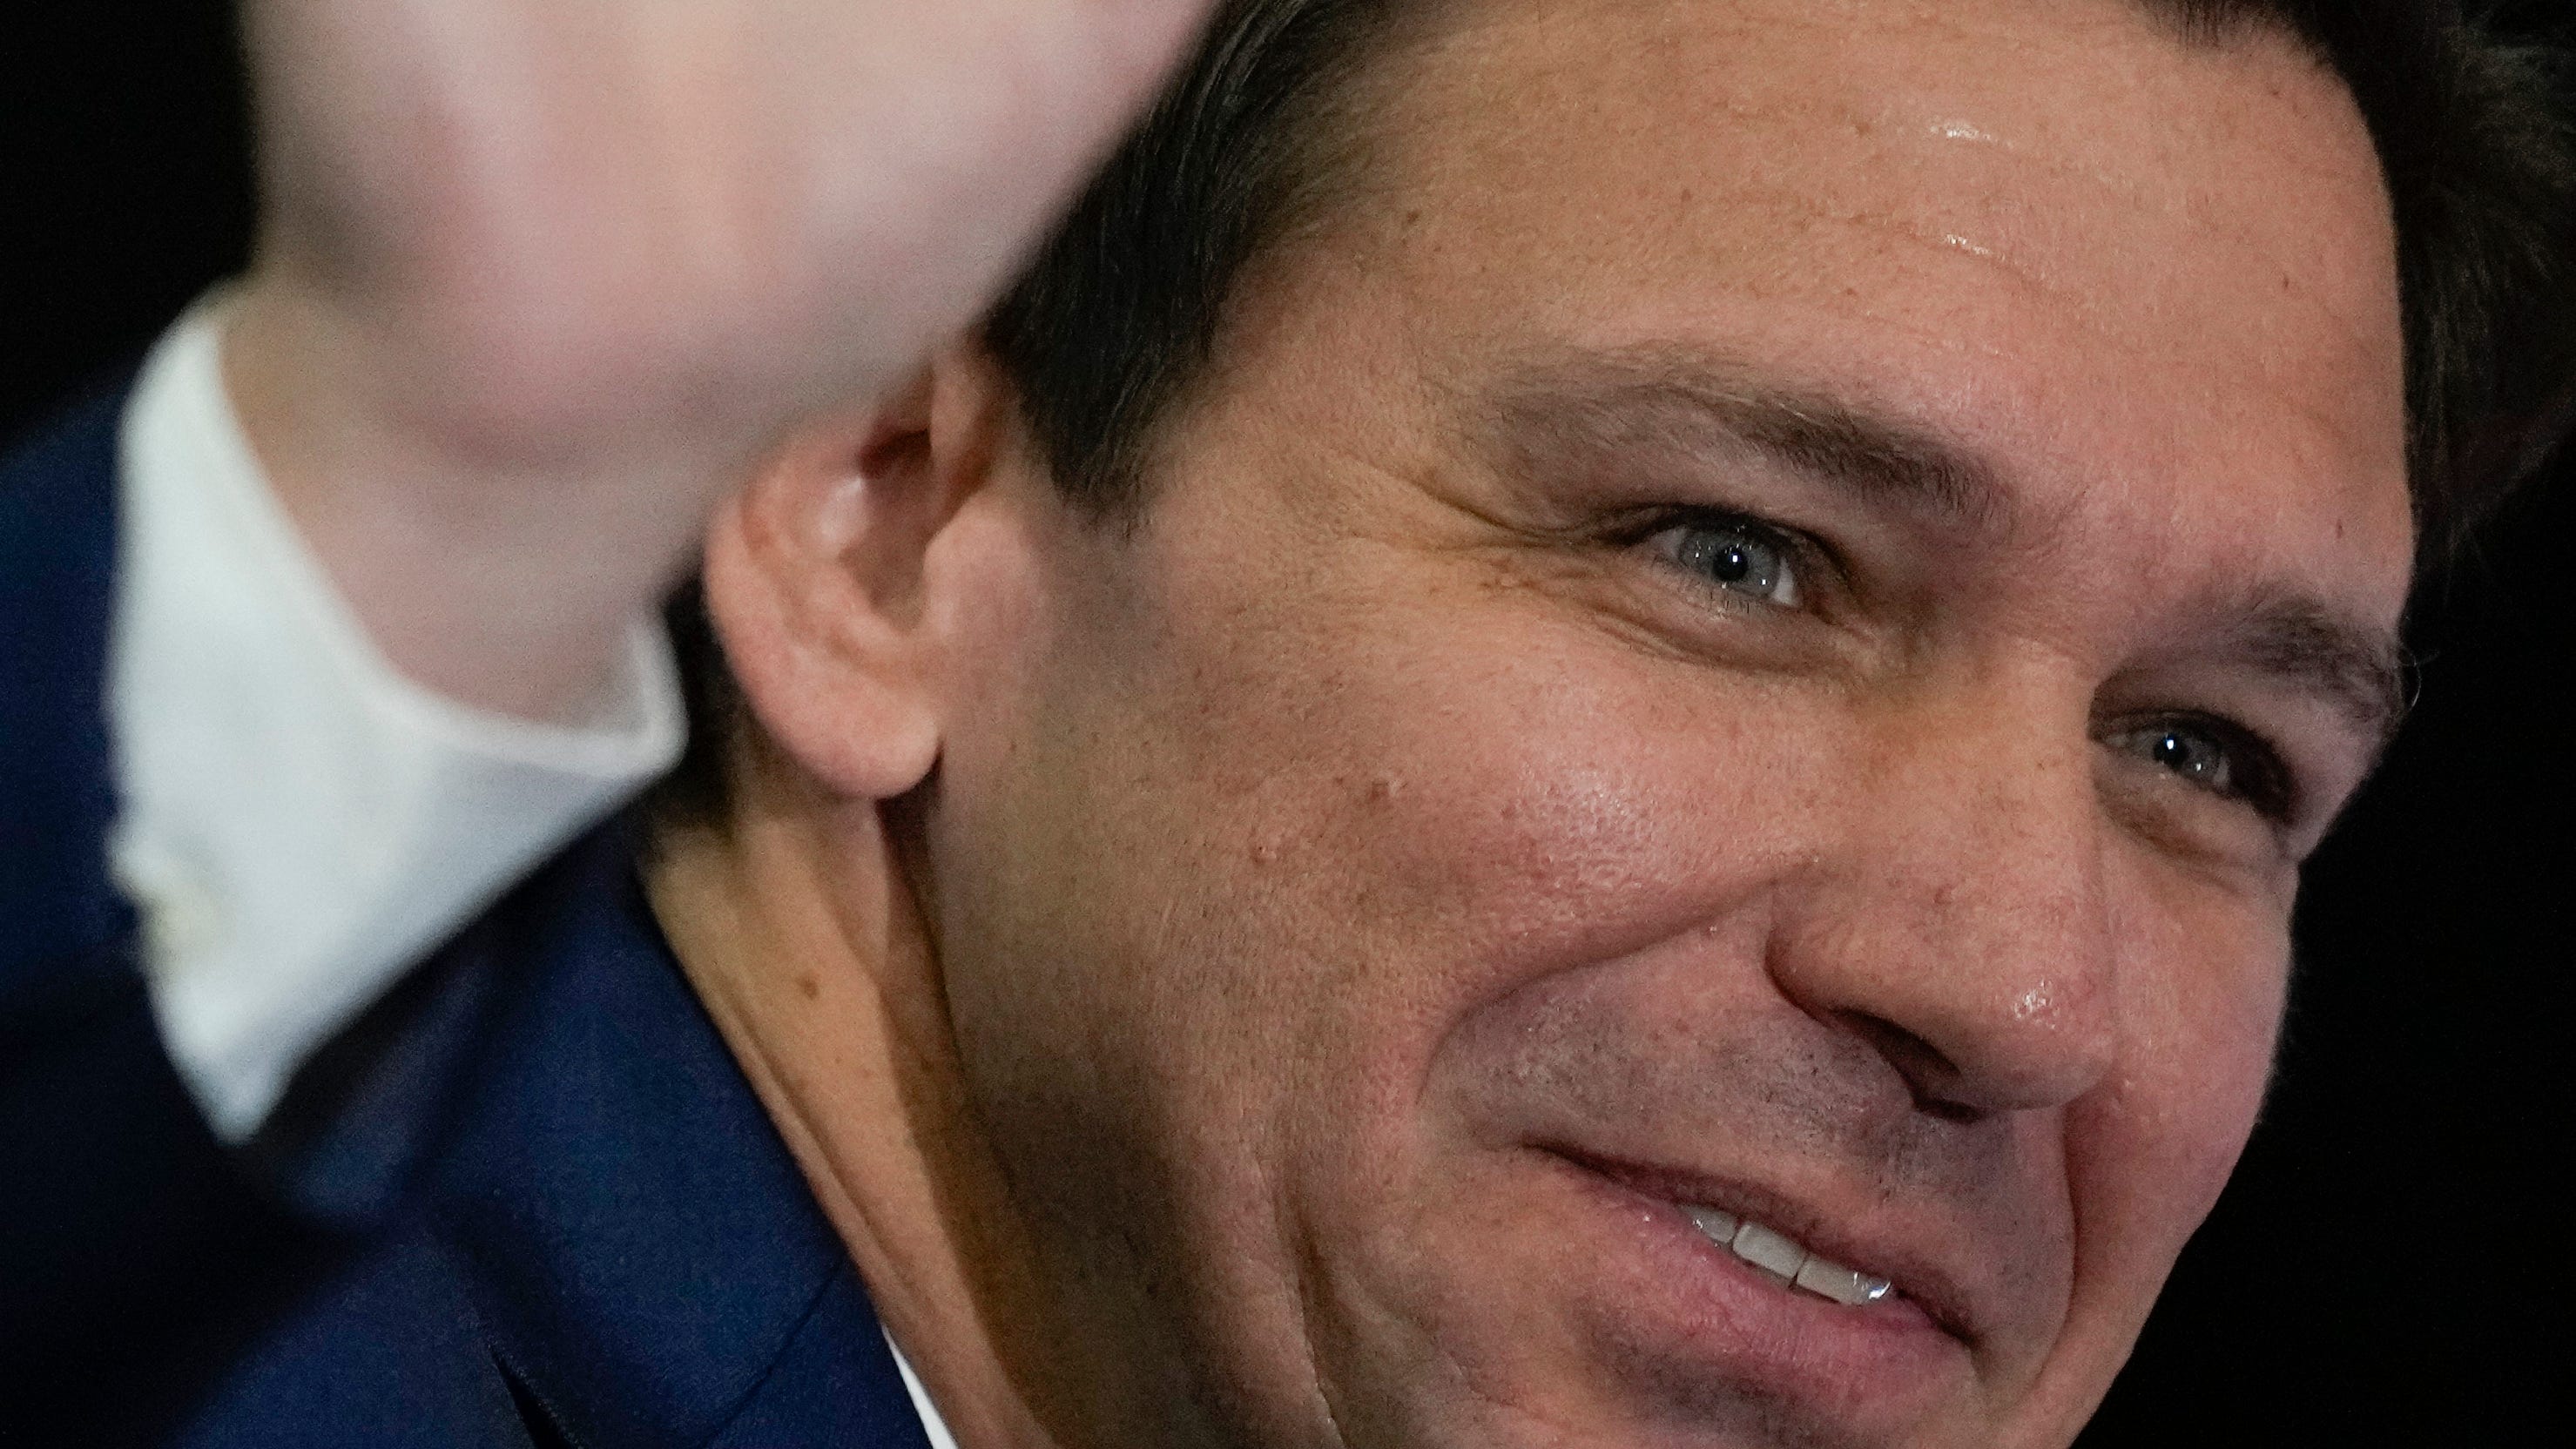 Florida Governor Ron DeSantis waves as he arrives for a press conference to sign several bills related to public education and teacher pay, in Miami, Tuesday, May 9, 2023.